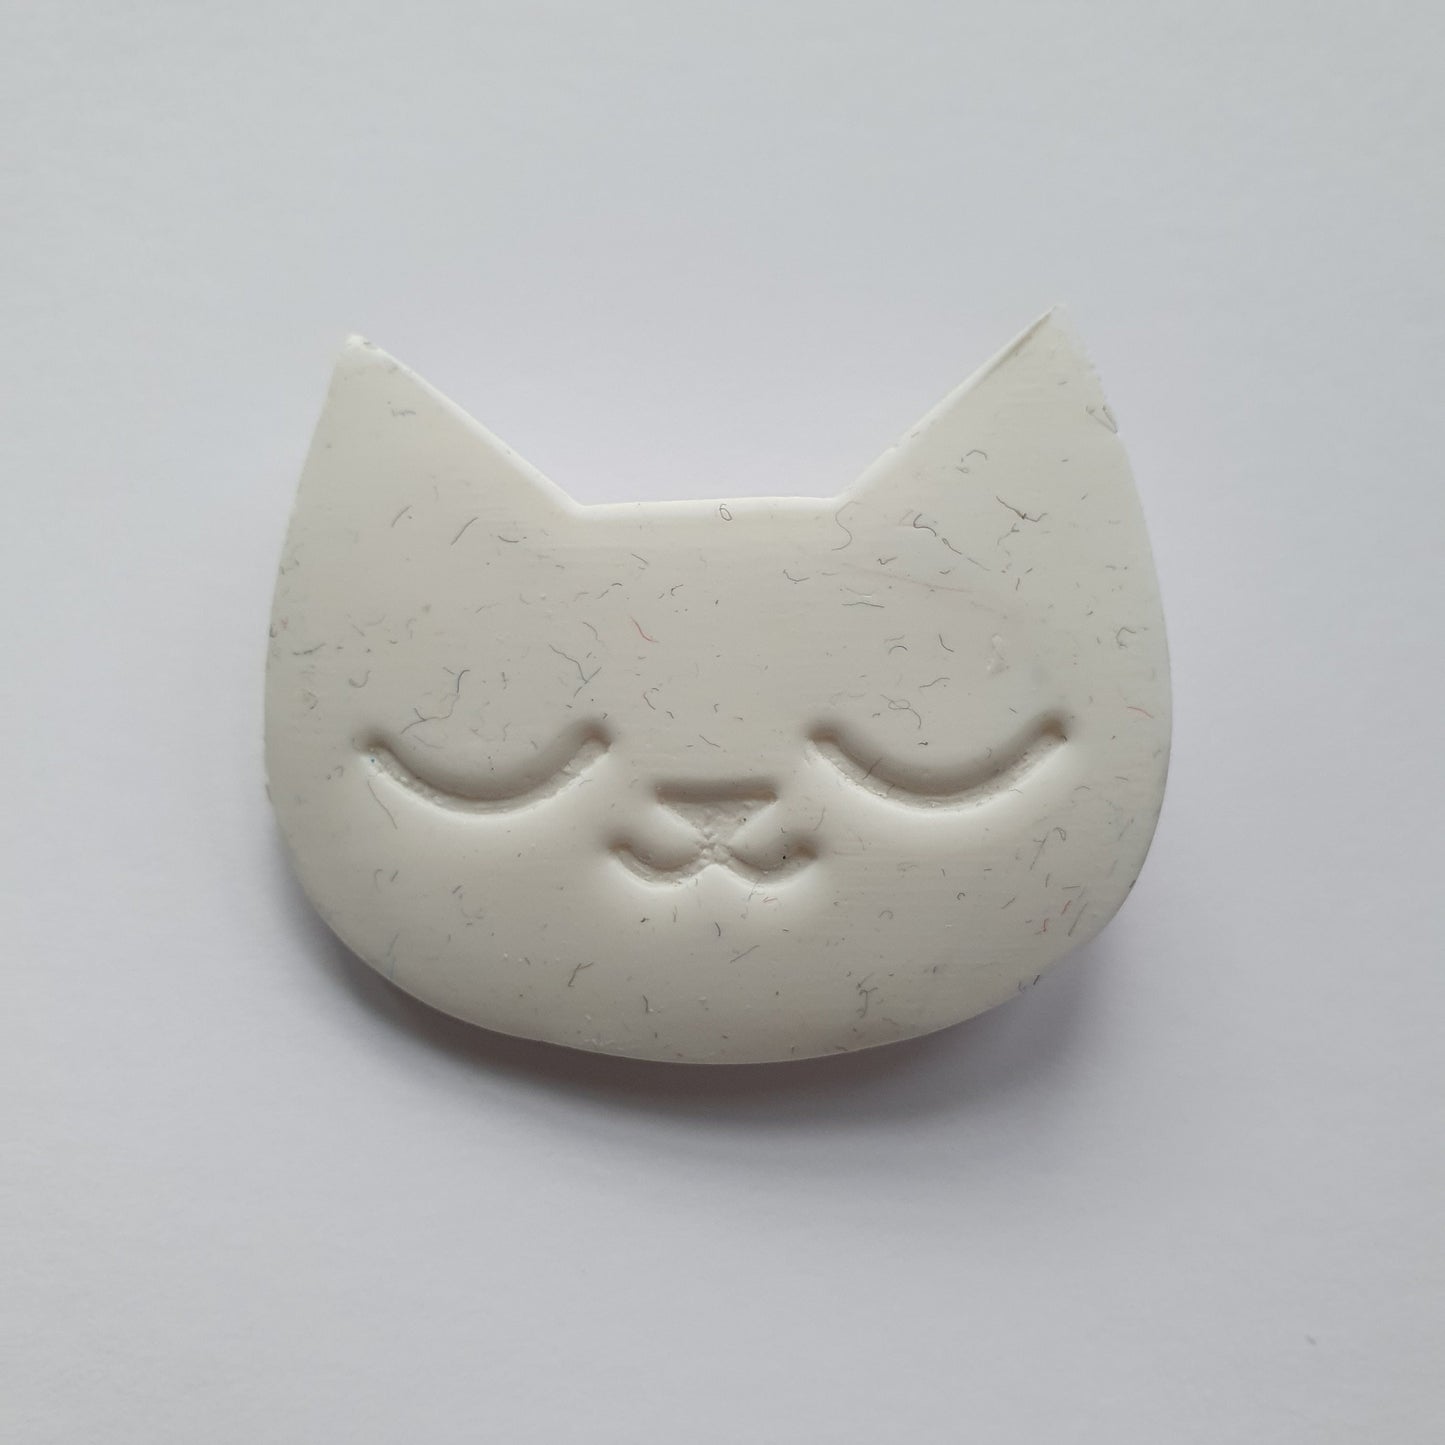 White Cat - Polymer Clay Badge